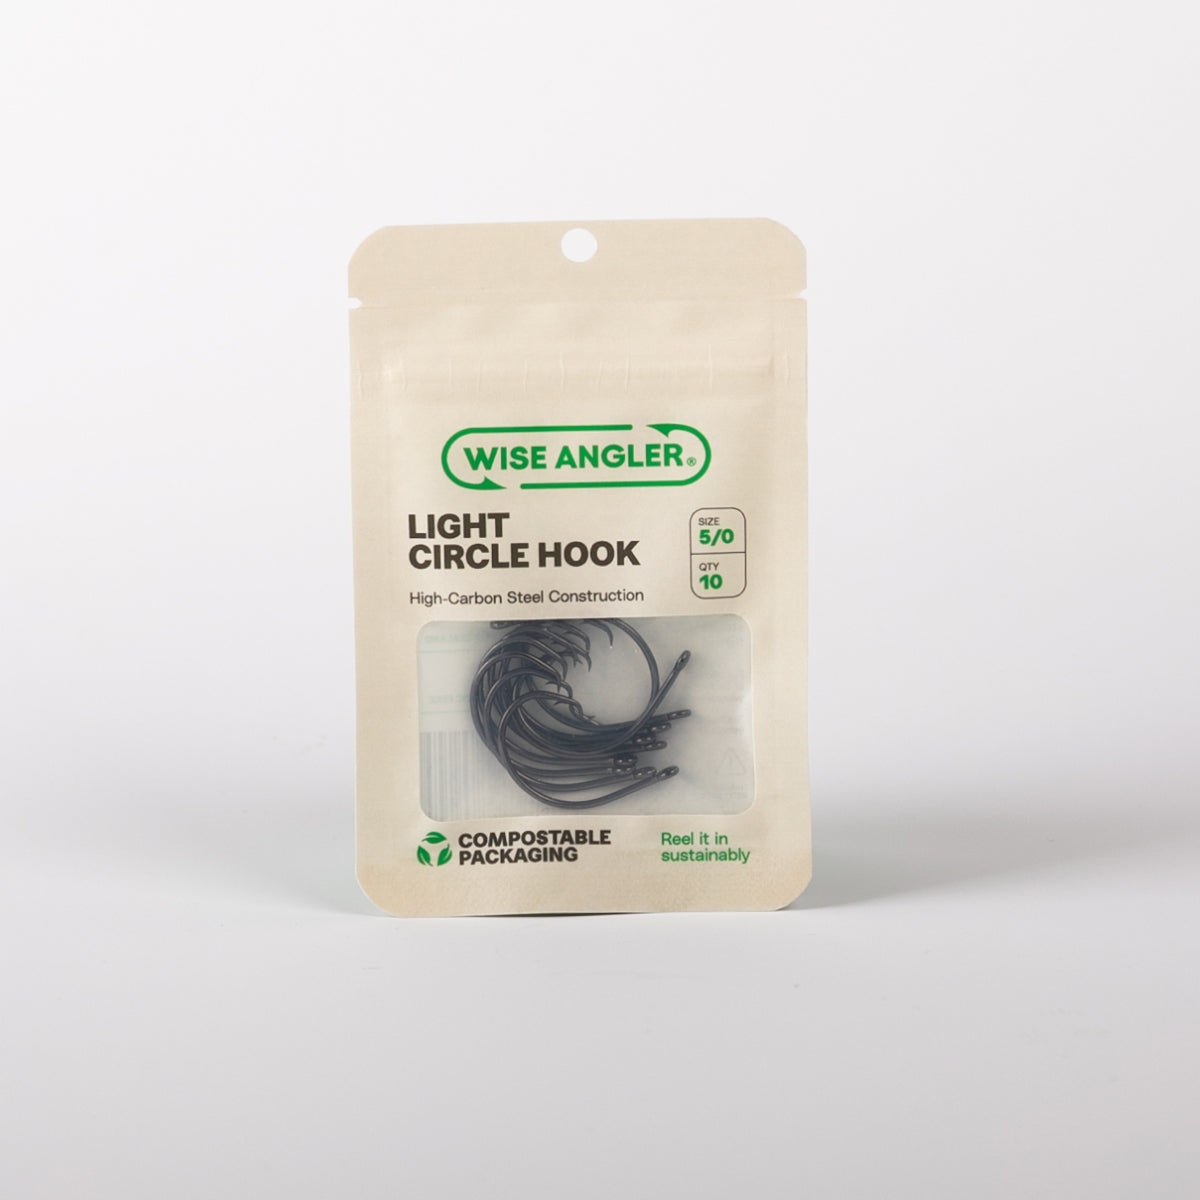 WISE ANGLER COMPOSTABLE PACKAGING FISHING HOOK LIGHT CIRCLE